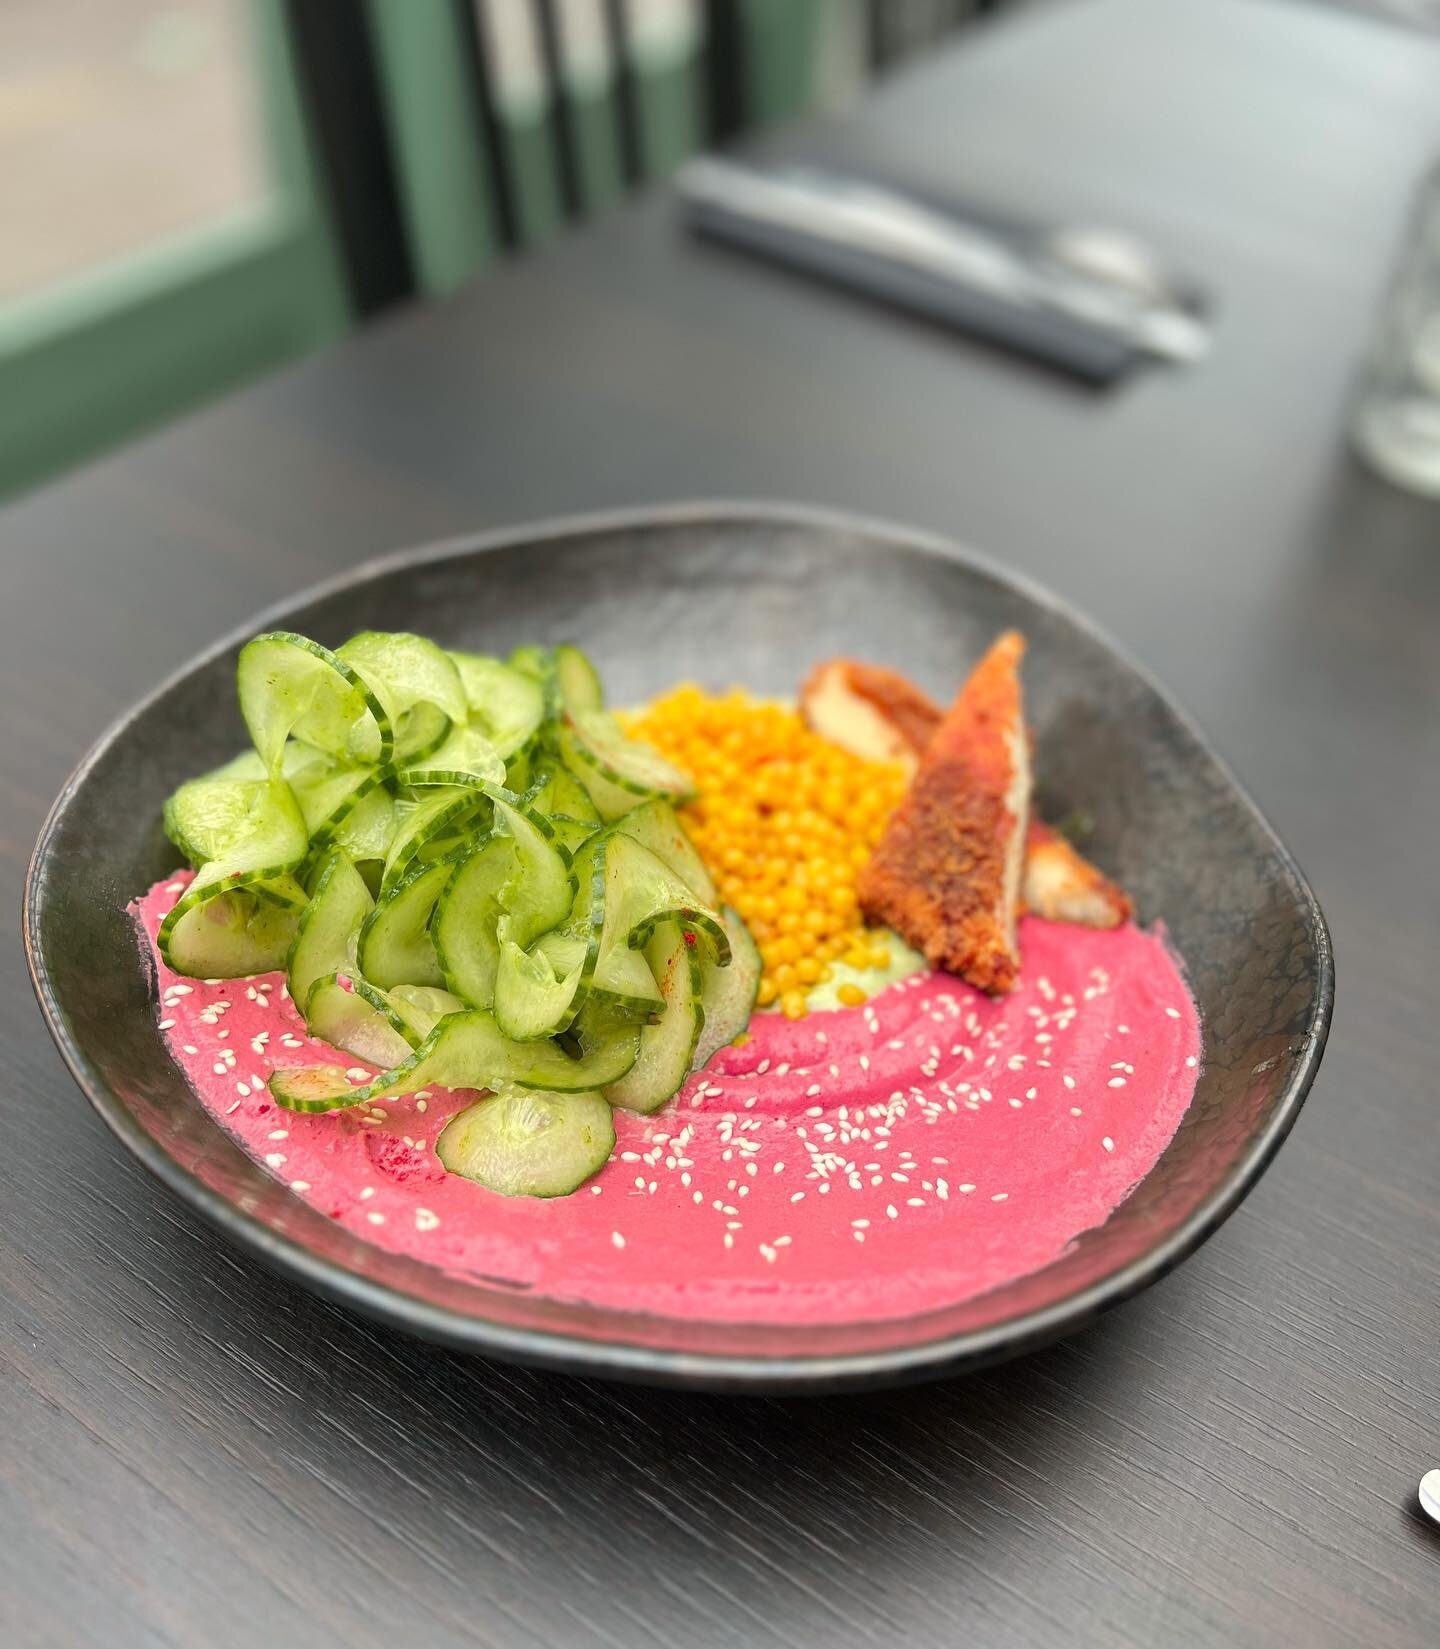 Meet the Kitsilano Beet Bowl! New to our lunch menu today. 

Creamy beet tahini, halloumi, Israeli couscous, and spiralised cucumber on a bed of fresh mint whipped coconut yoghurt🌿